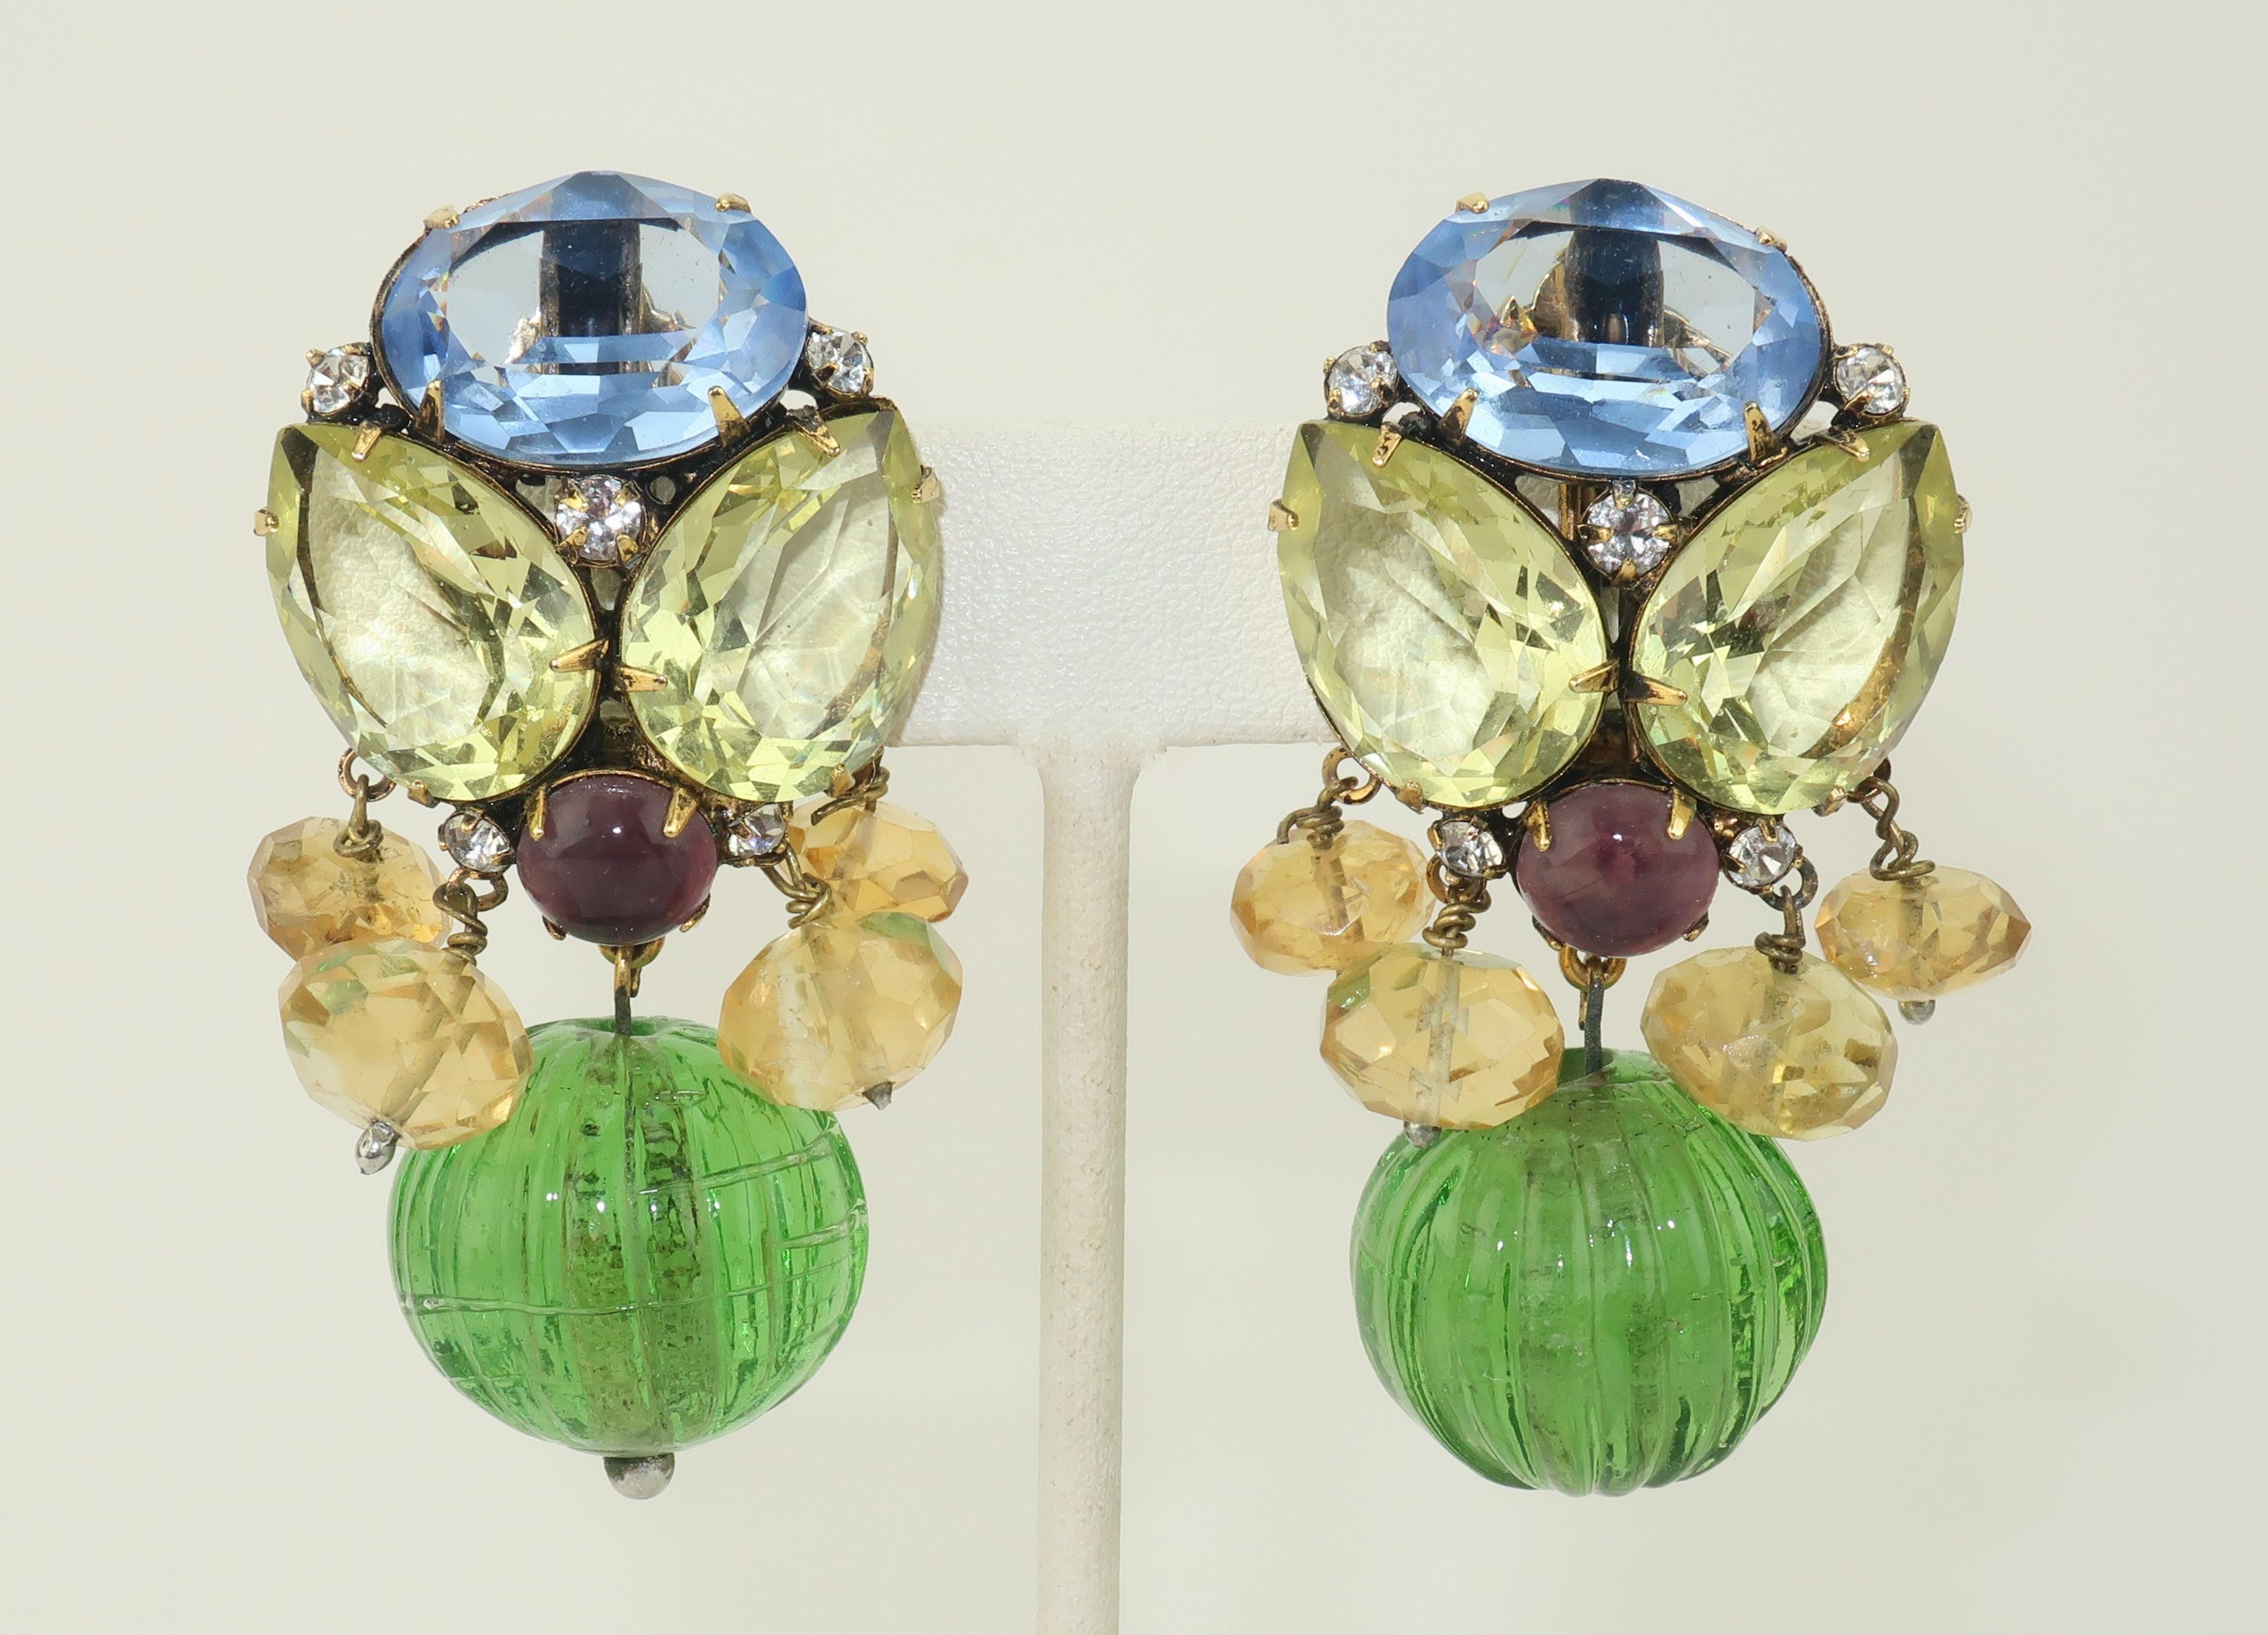 Gorgeous Iradj Moini clip on earrings designed with yellow quartz, citrine and amethyst semi precious stones accented by blue crystal and a green glass orb dangle.  The gilt gold setting is backed with clip on hardware and hallmarked with medallions